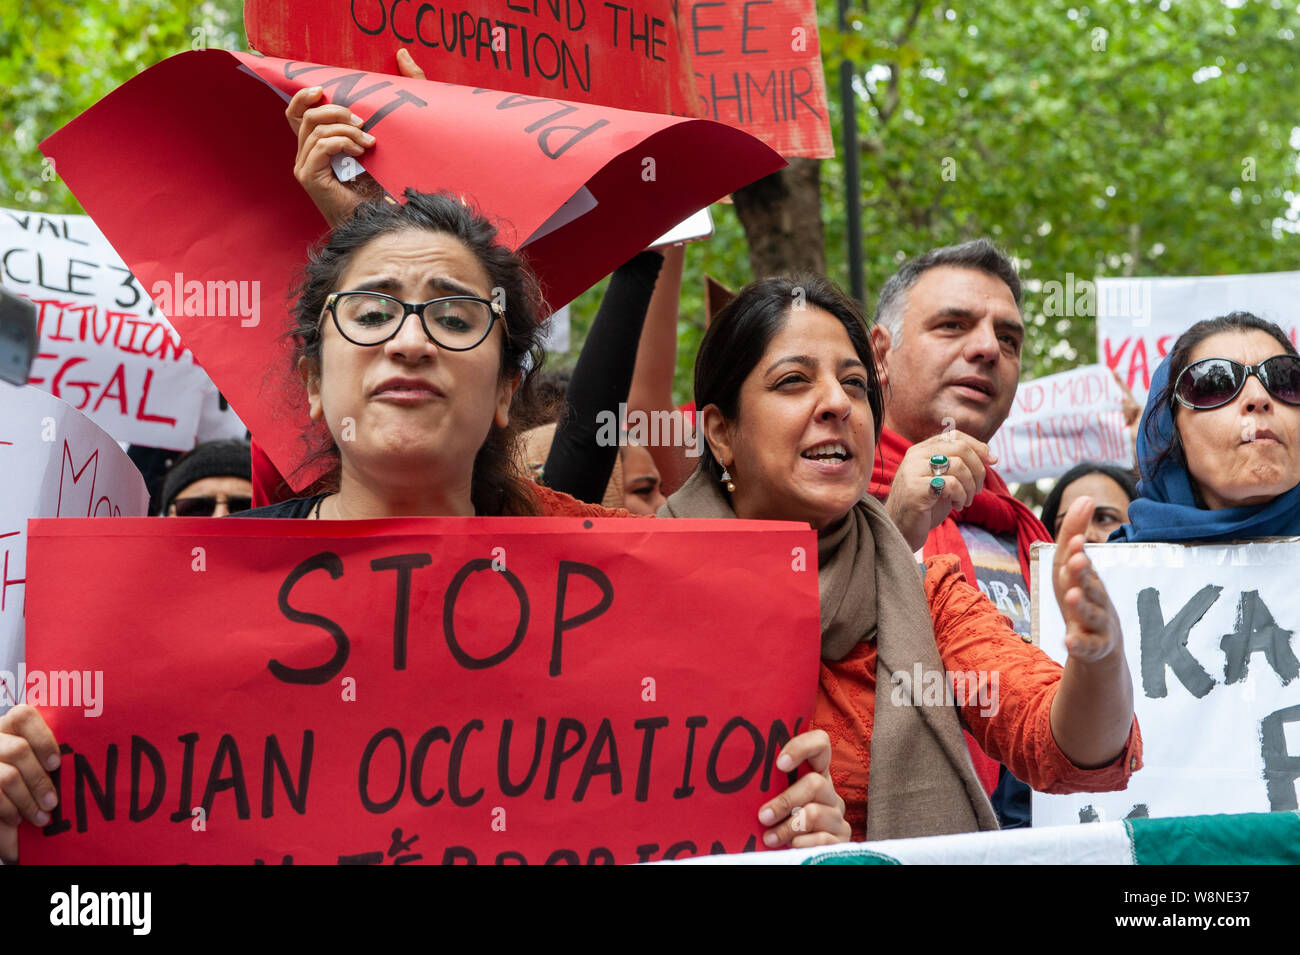 London, England. 10th August, 2019. Demonstrators gathered outside India House in London to show support for Kashmiris and to protest against occupation and oppression by India in Kashmir.  Credit: Richard Hancox. Stock Photo